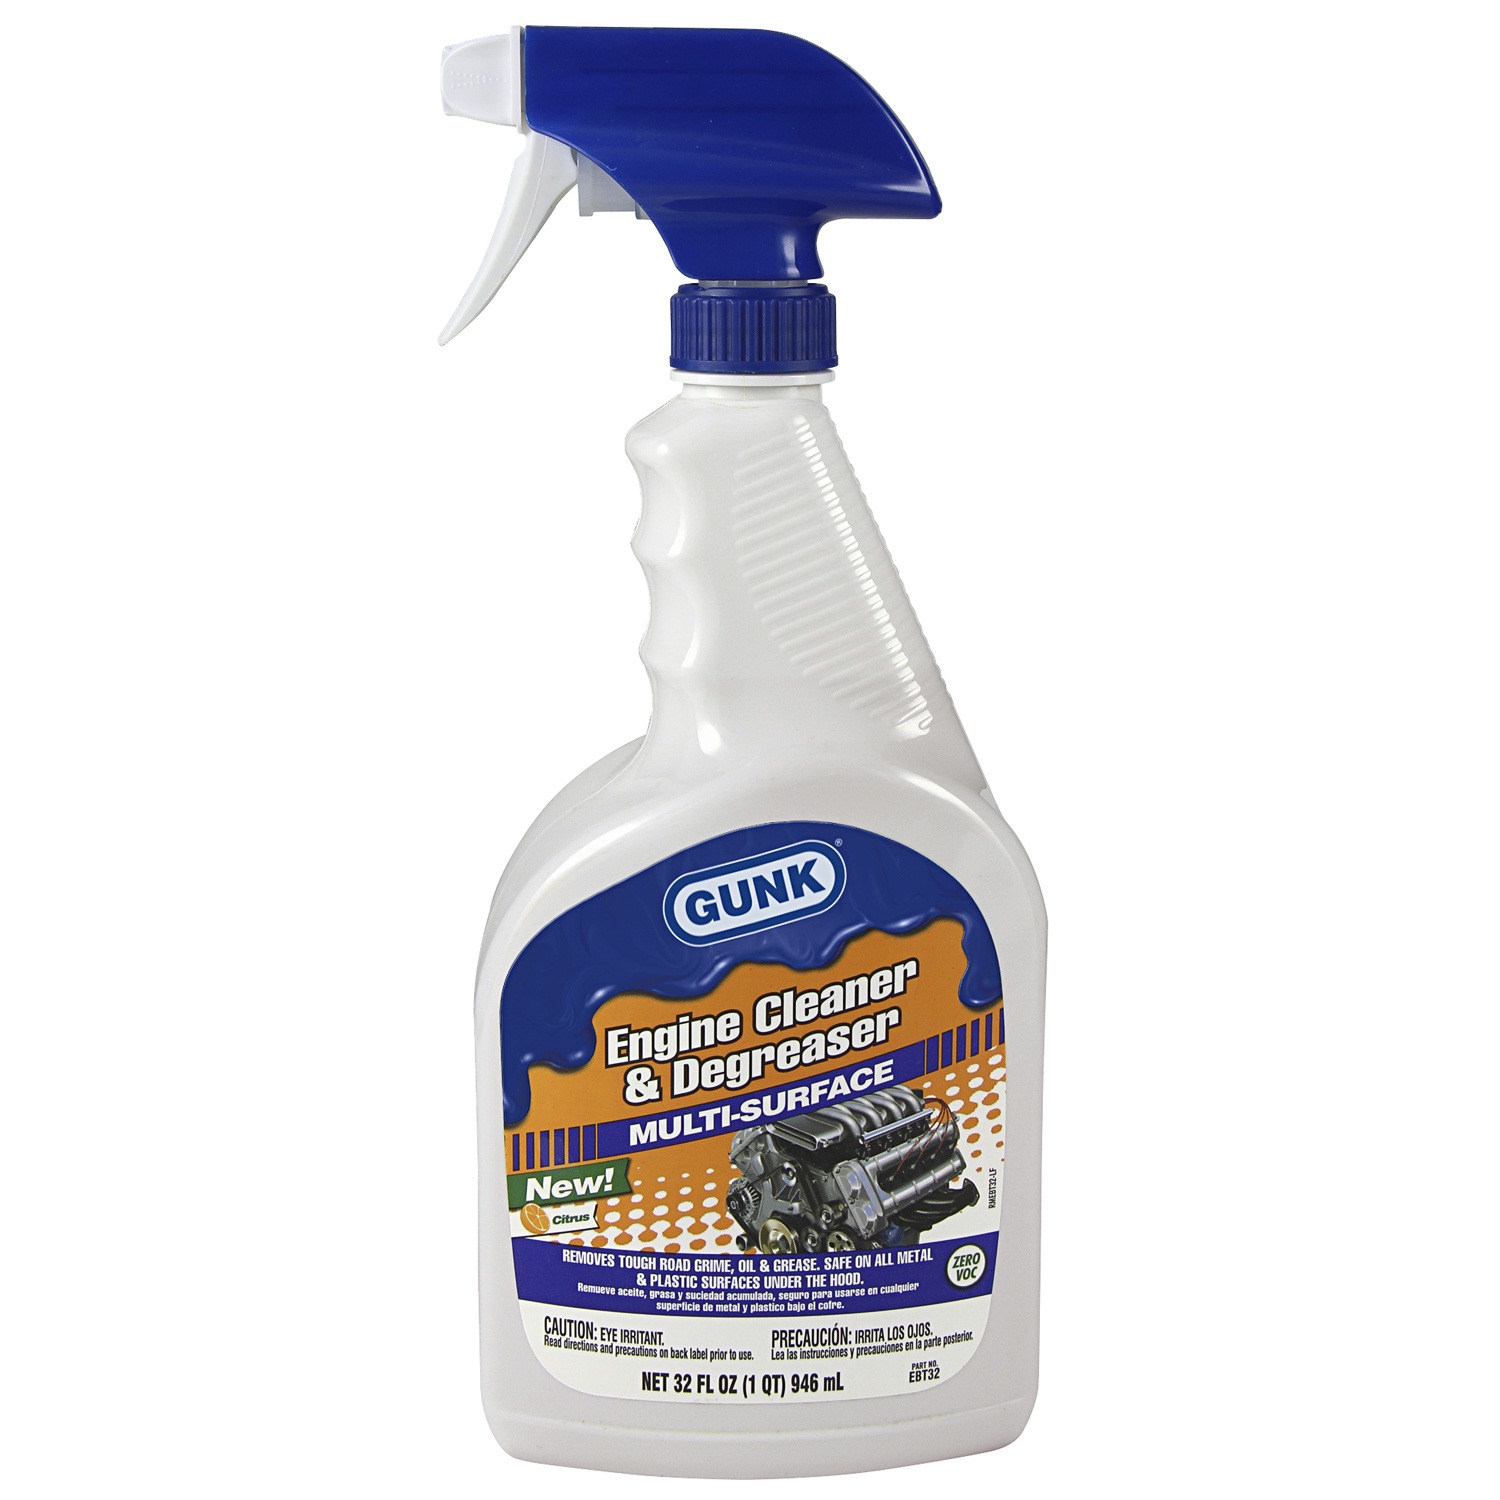 Learn How to Do Car Engine Detailing with Waterless Engine Cleaner